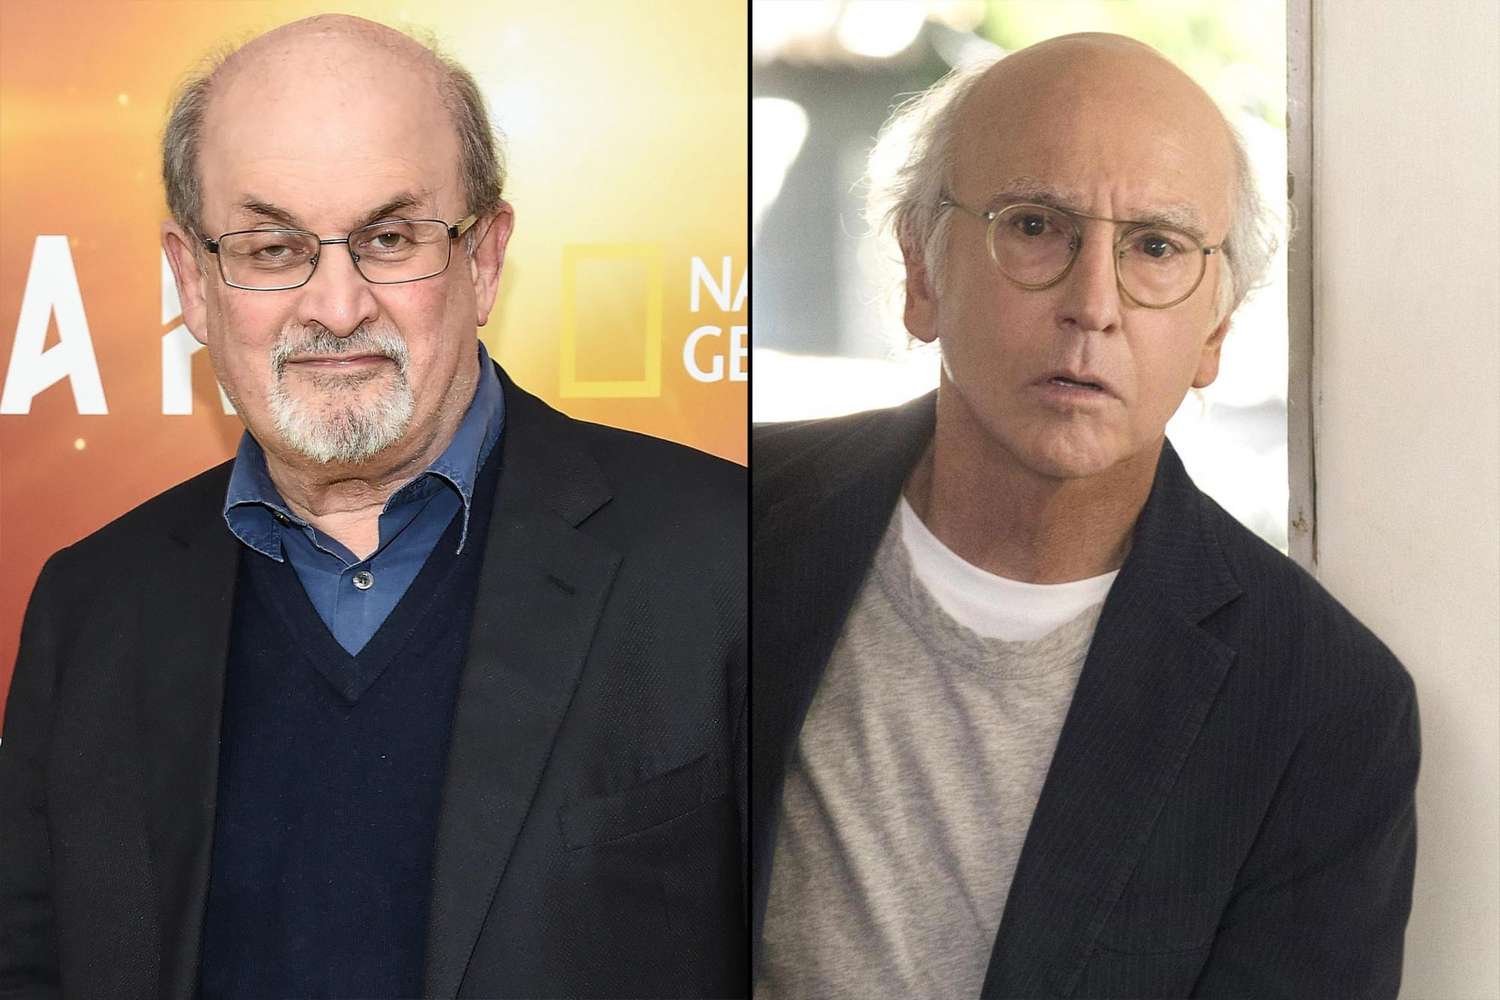 Curb Your Enthusiasm landed Salman Rushdie for that fatwa story line |  